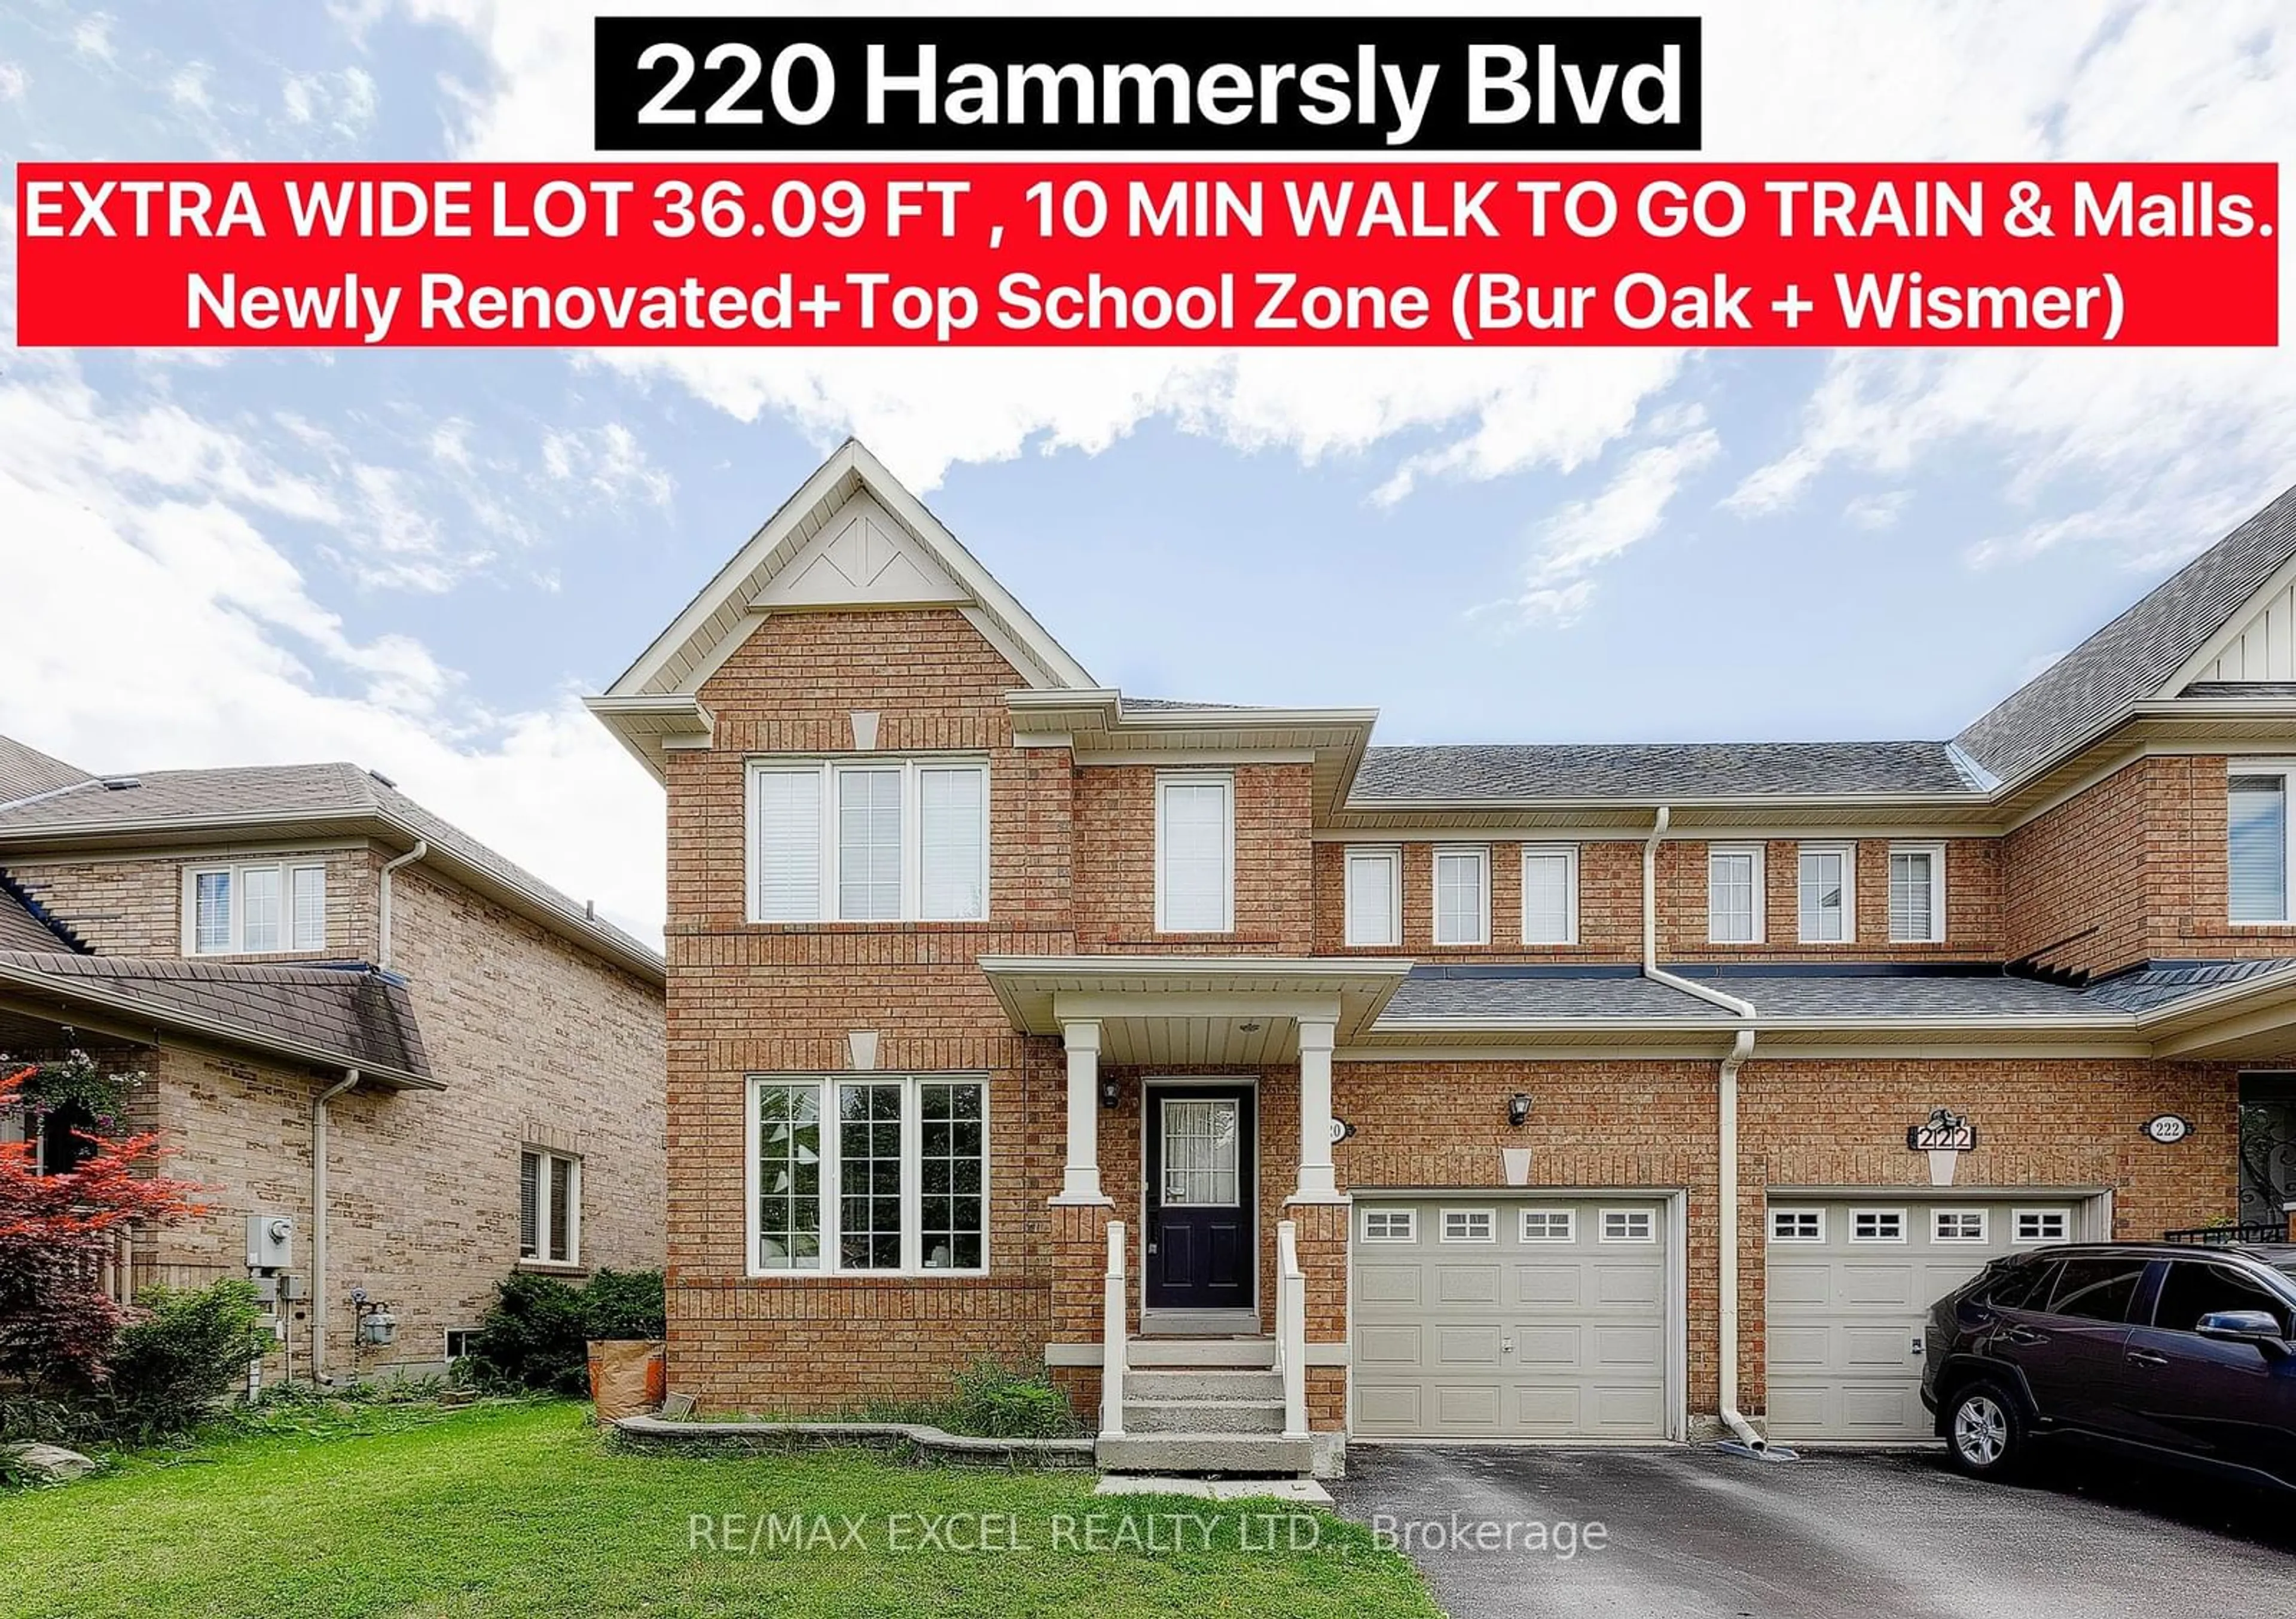 Home with brick exterior material for 220 Hammersly Blvd, Markham Ontario L6E 2C9